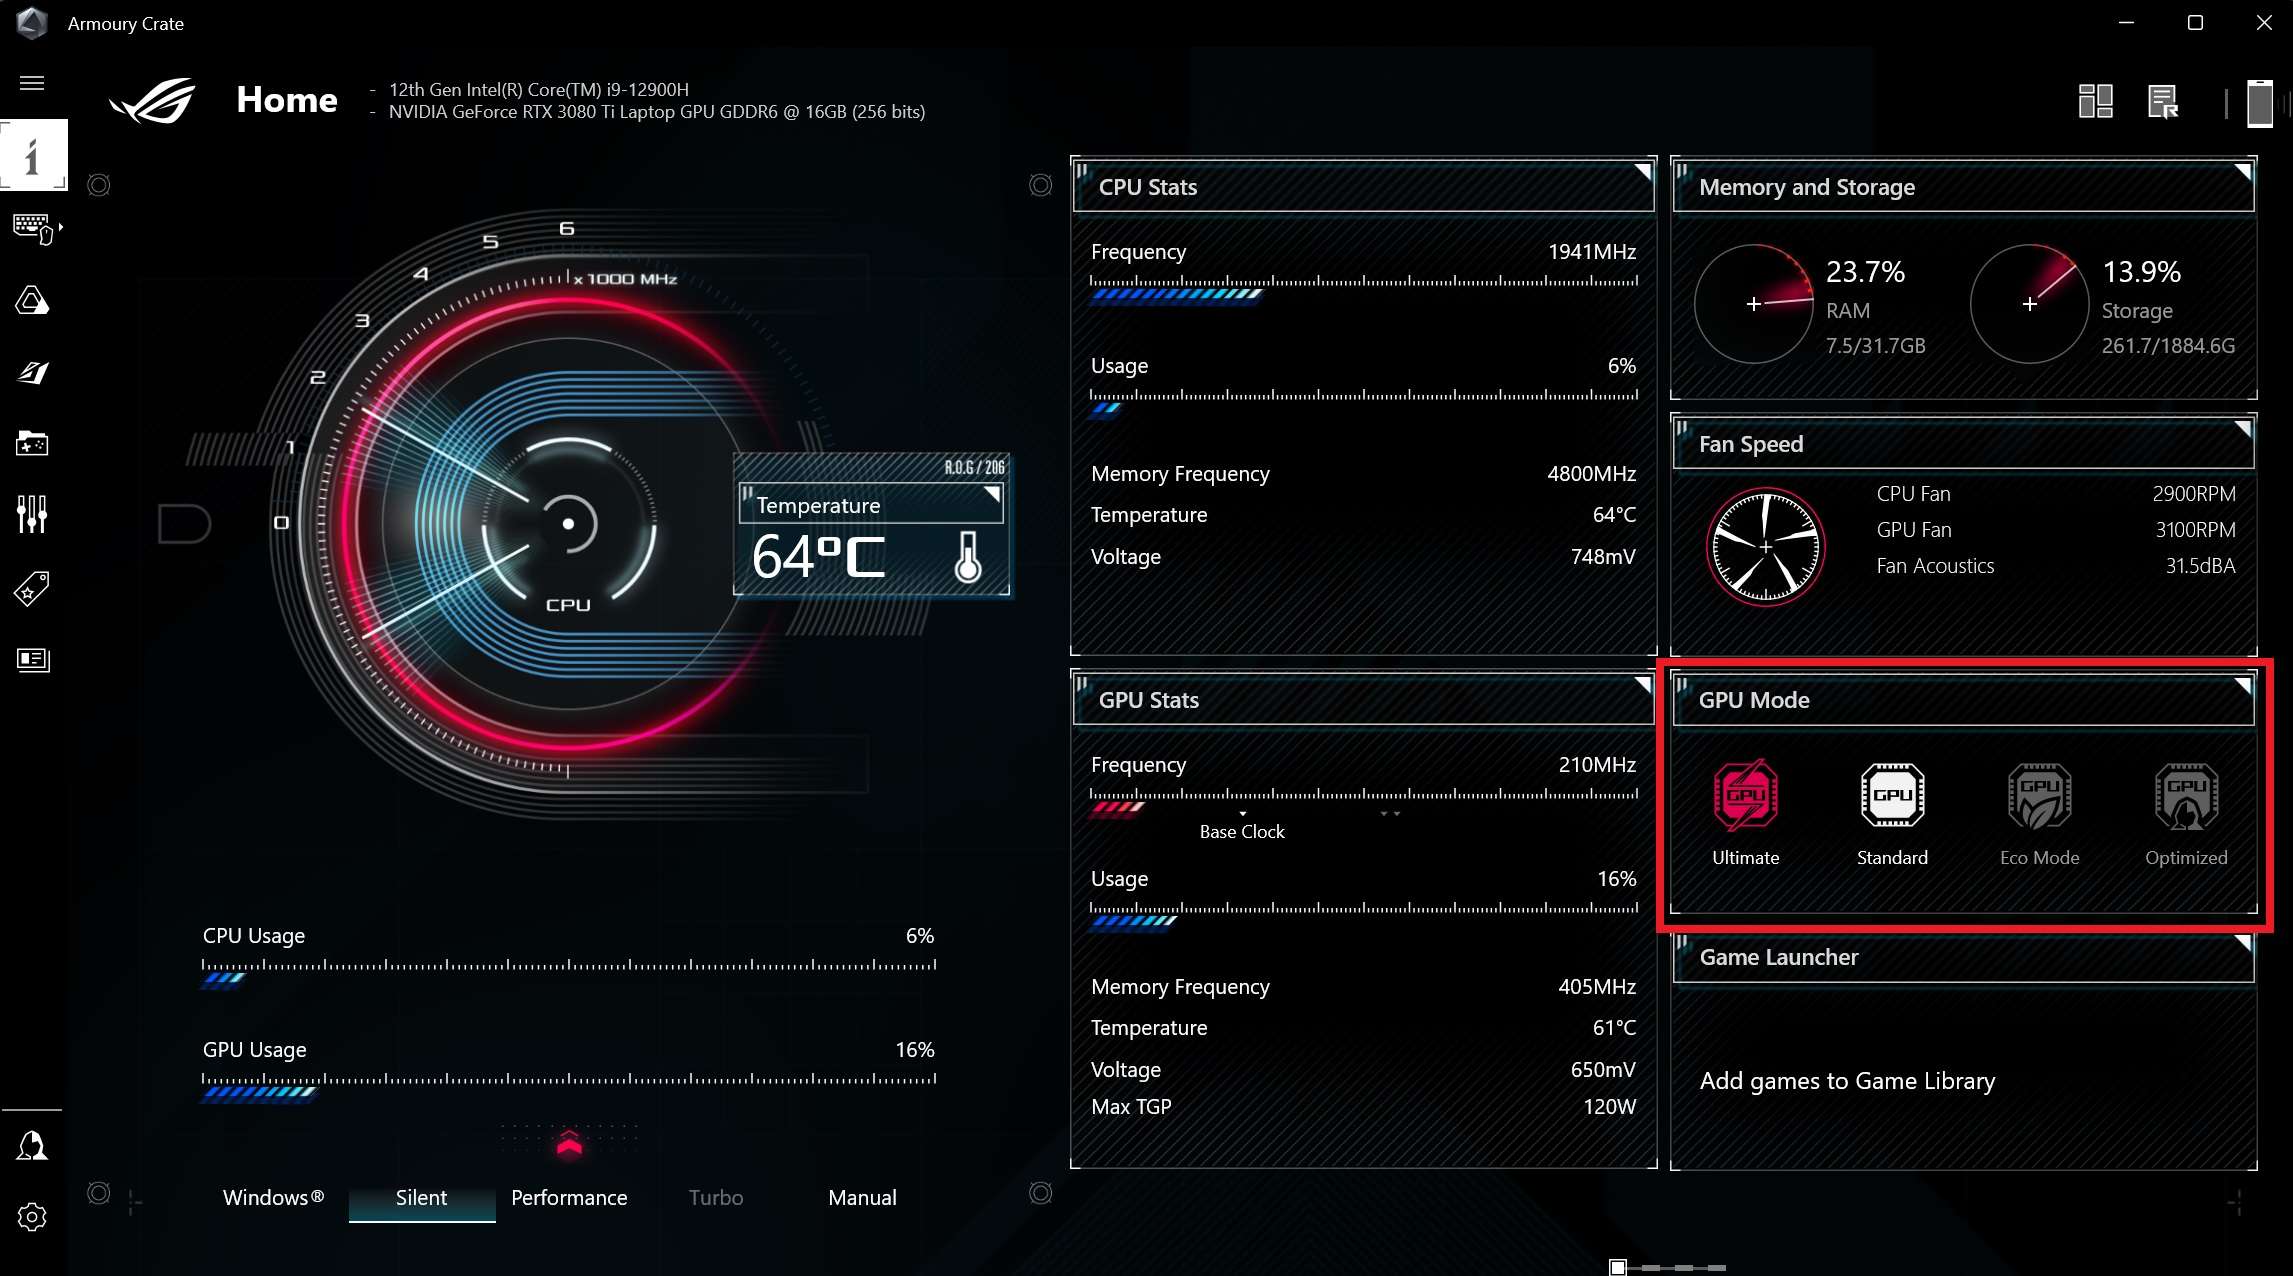 A screenshot of the Armoury Crate software, with the GPU Mode section of options highlighted.